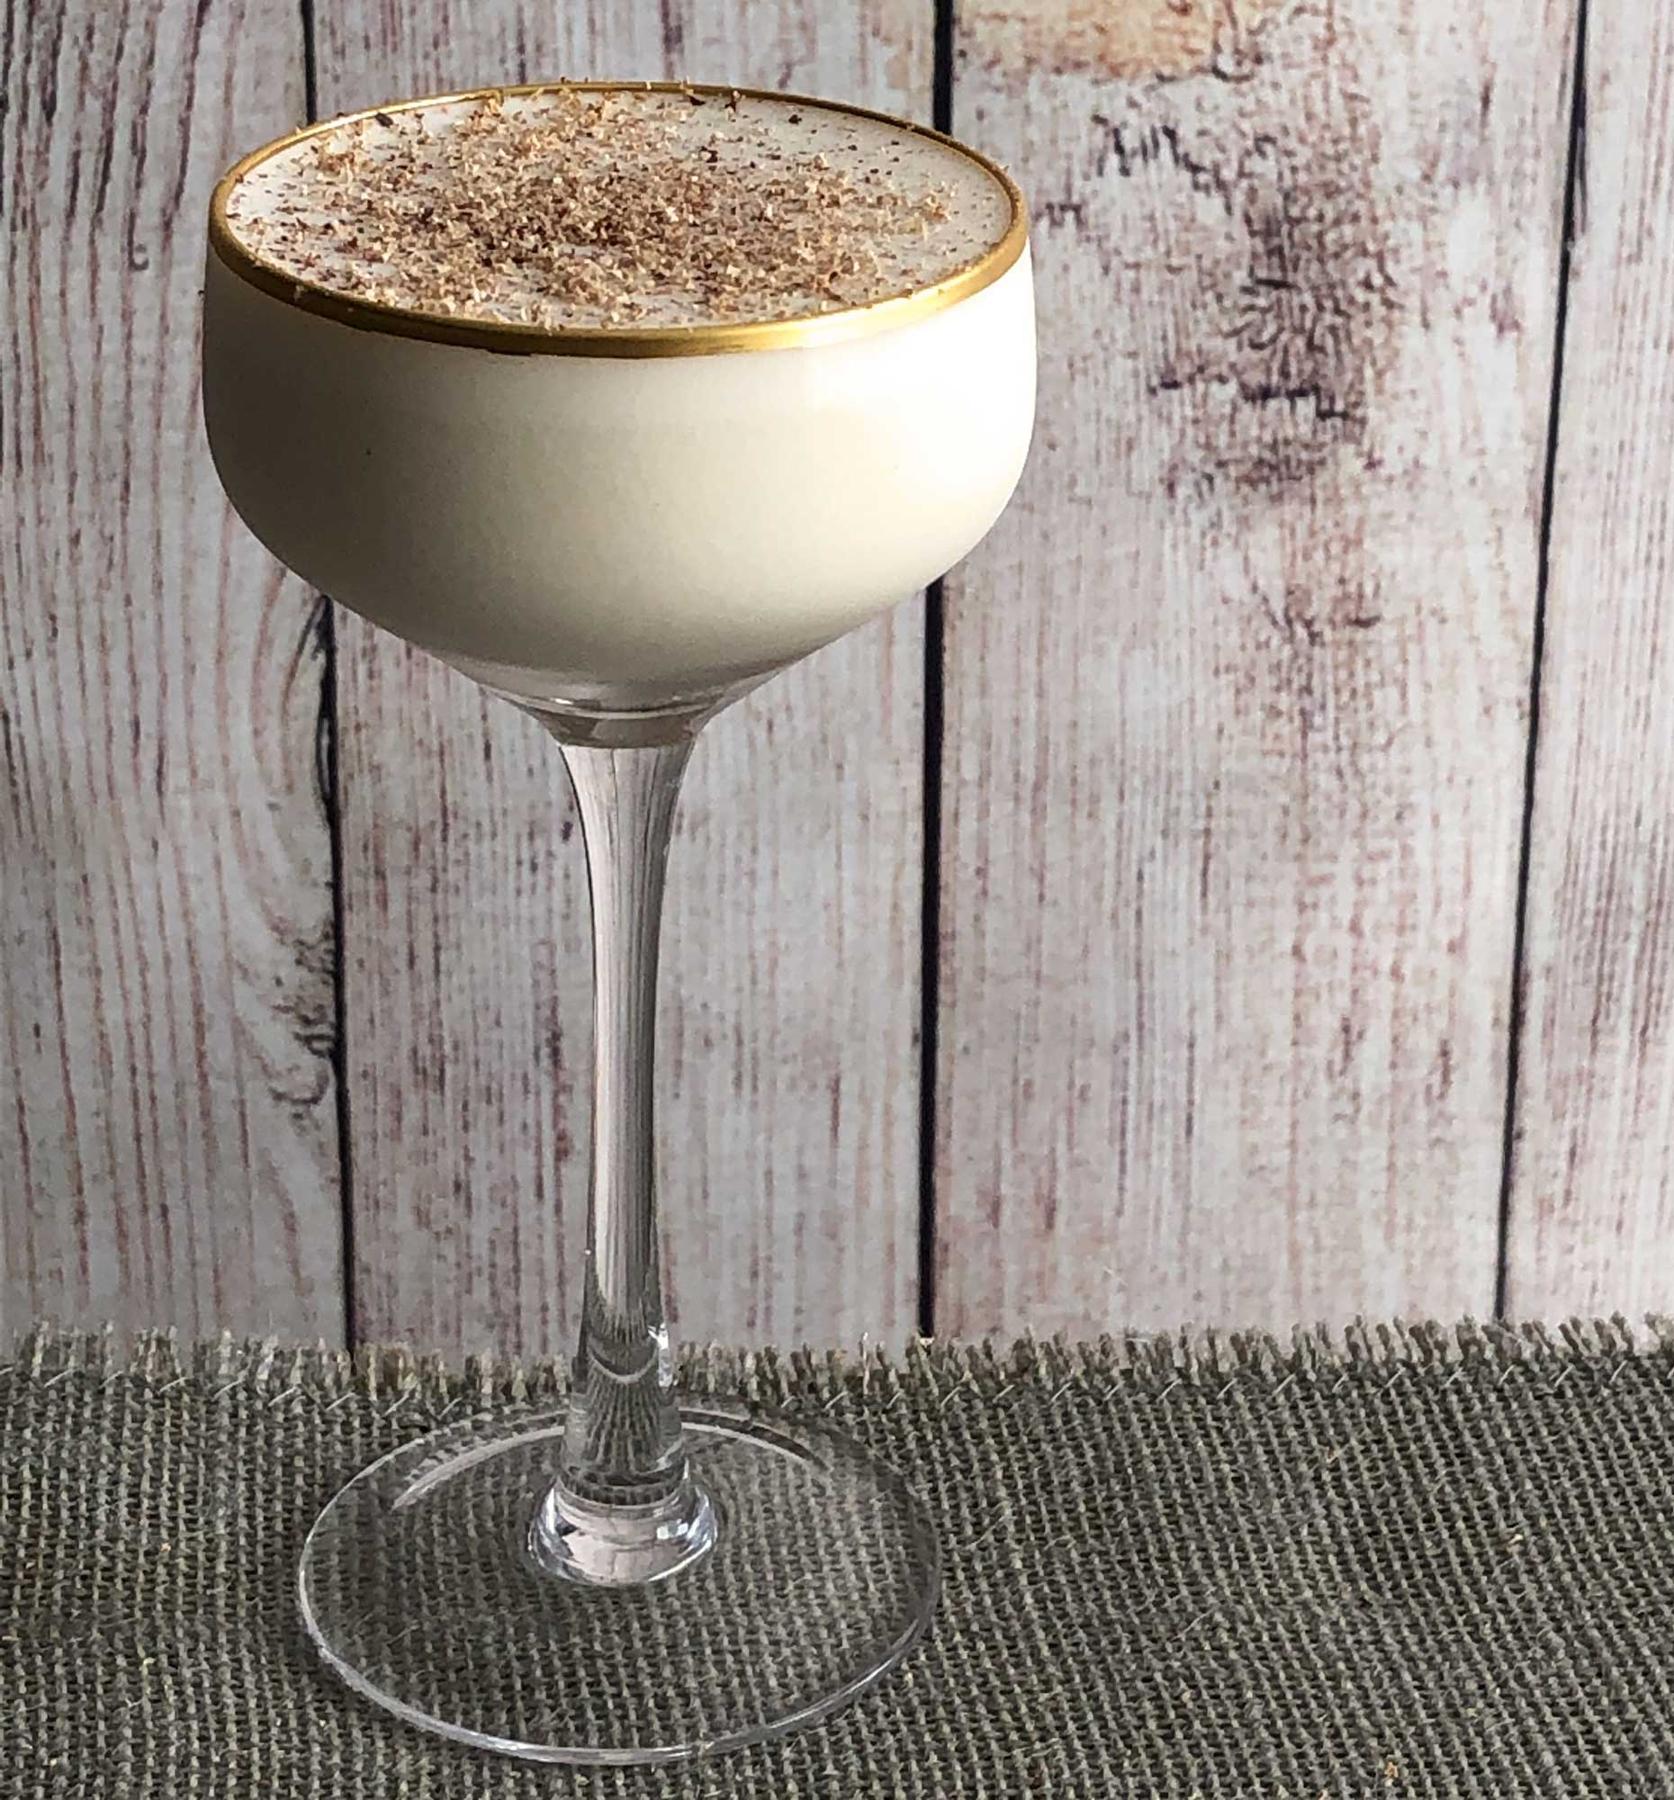 An example of the Barbary Coast, the mixed drink (drink), variation of a drink from the Savoy Cocktail Book, featuring Tresmontaine “tabacal” Rancio, Hayman’s London Dry Gin, crème de cacao (white), cream, and grated nutmeg; photo by Lee Edwards